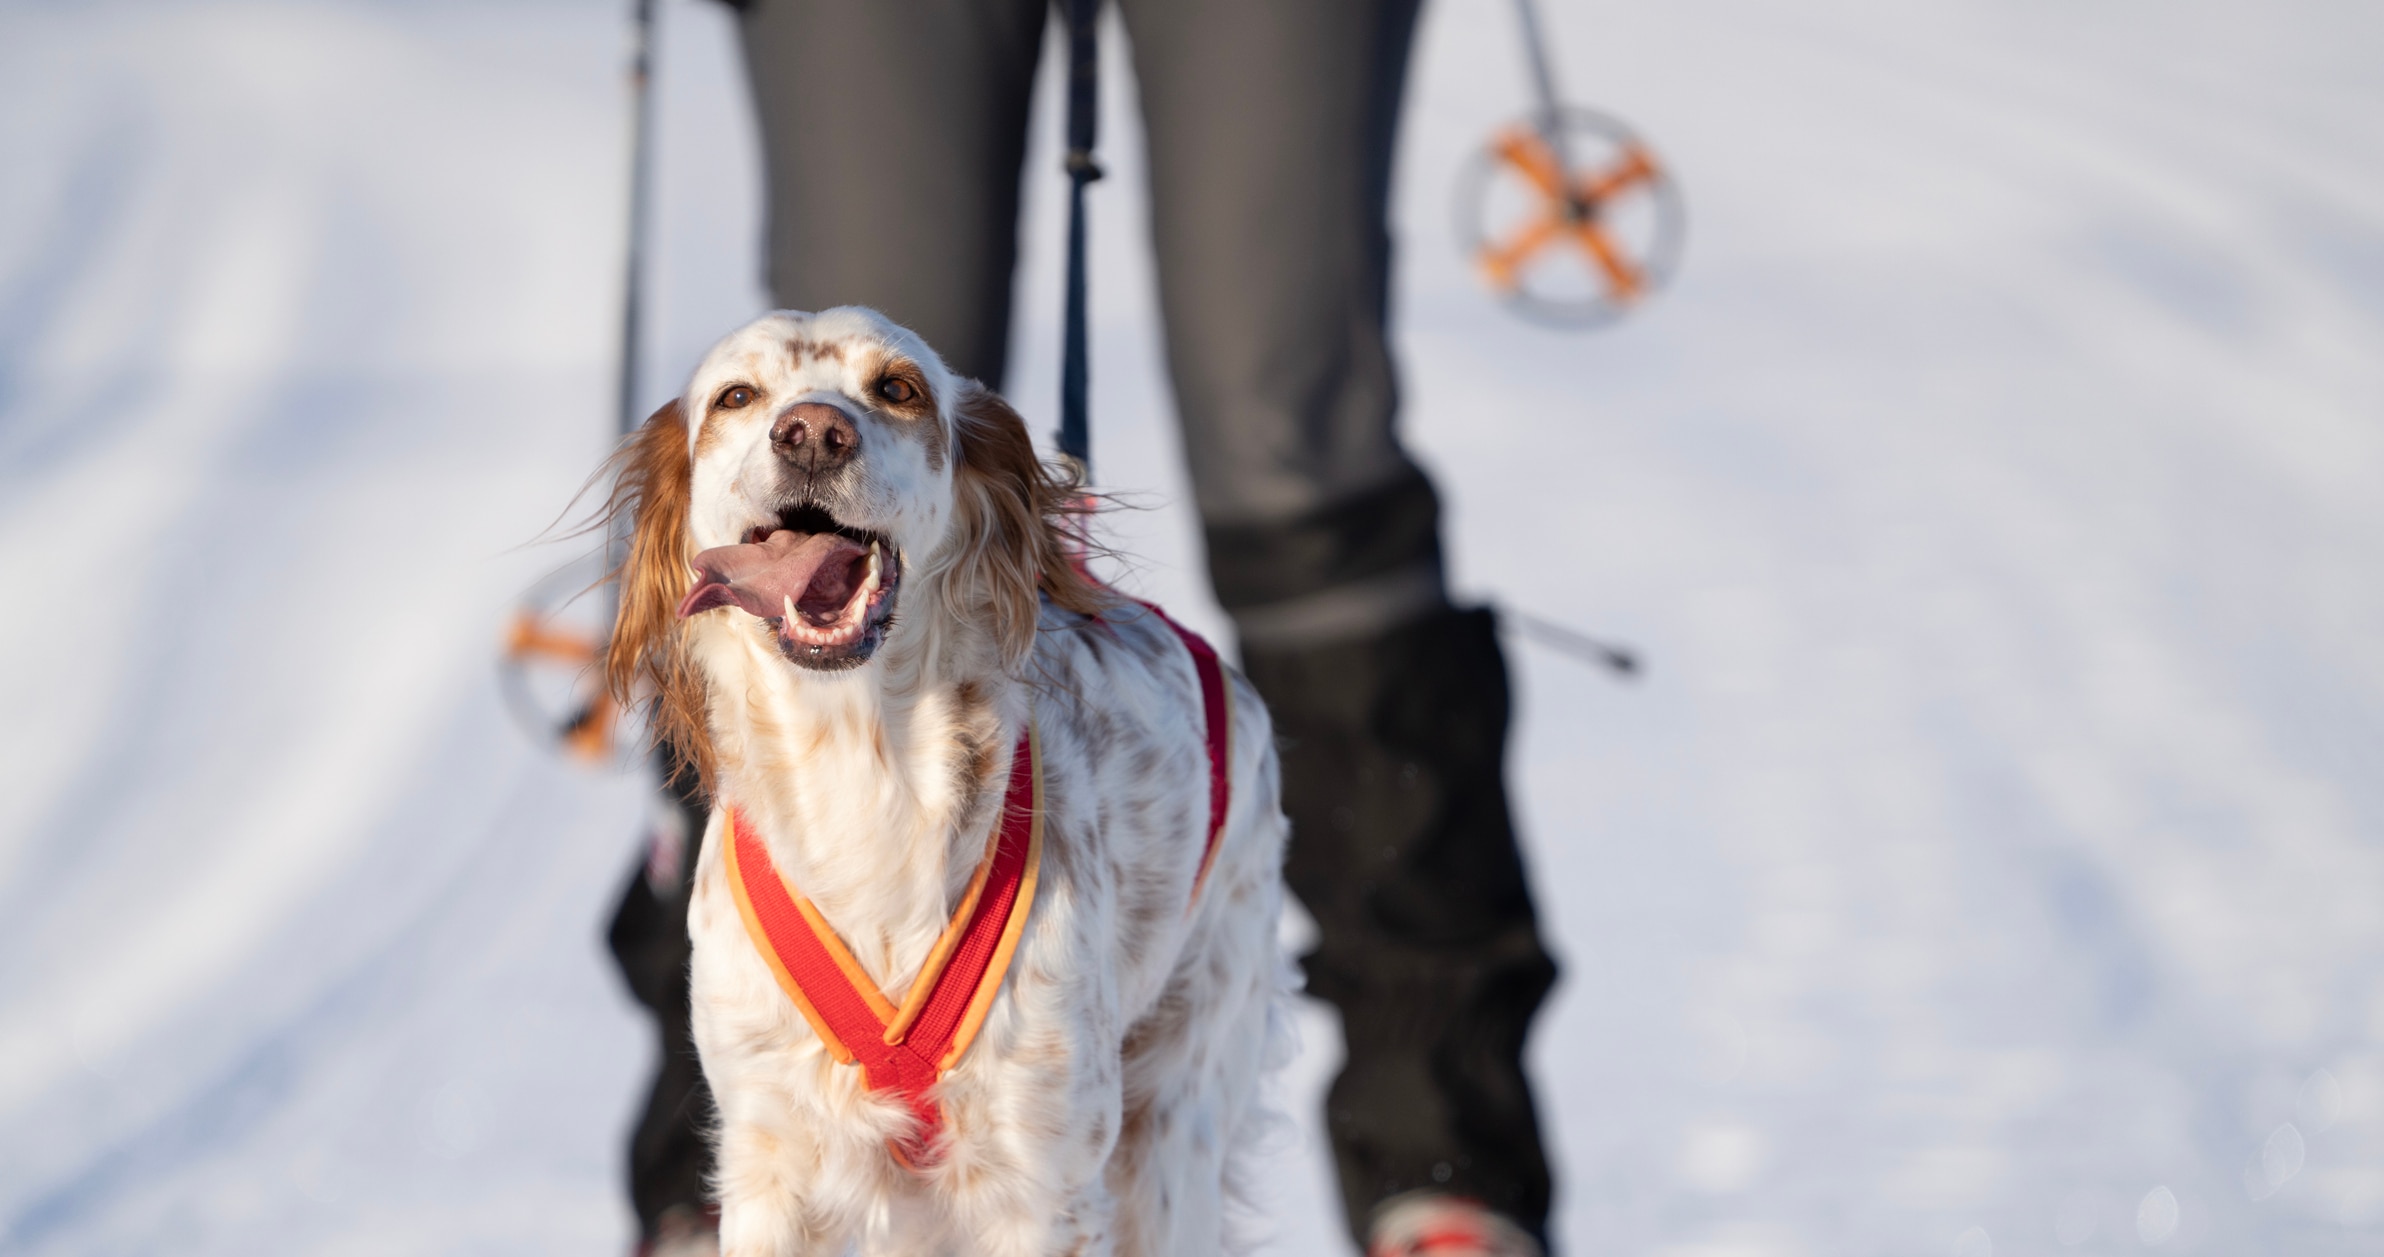 An English Setter does dog skijoring.